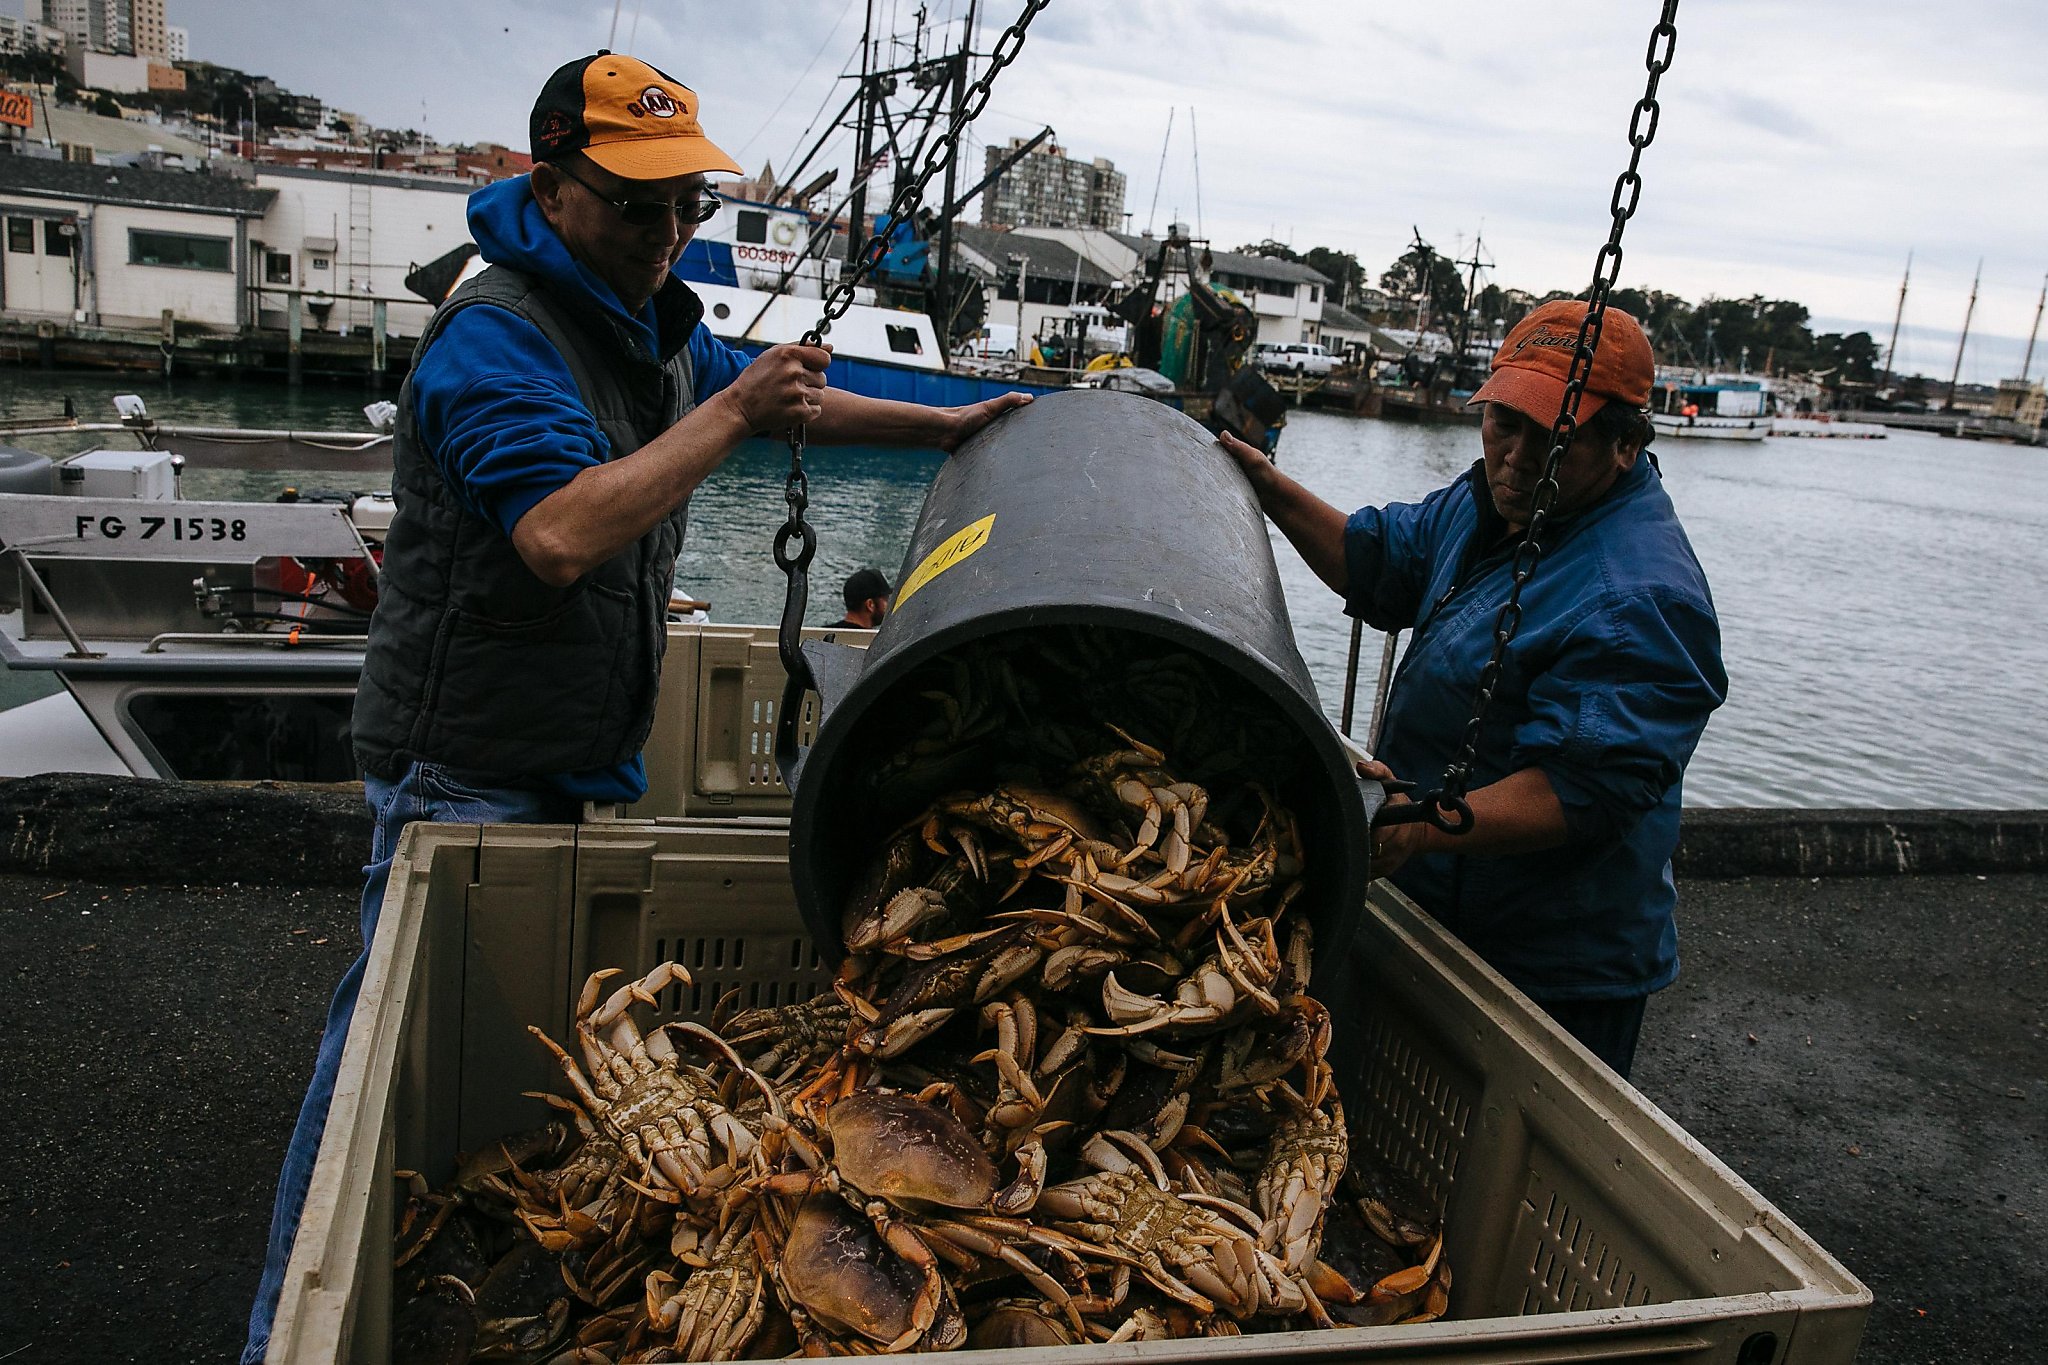 Dungeness crab season begins in the Bay Area